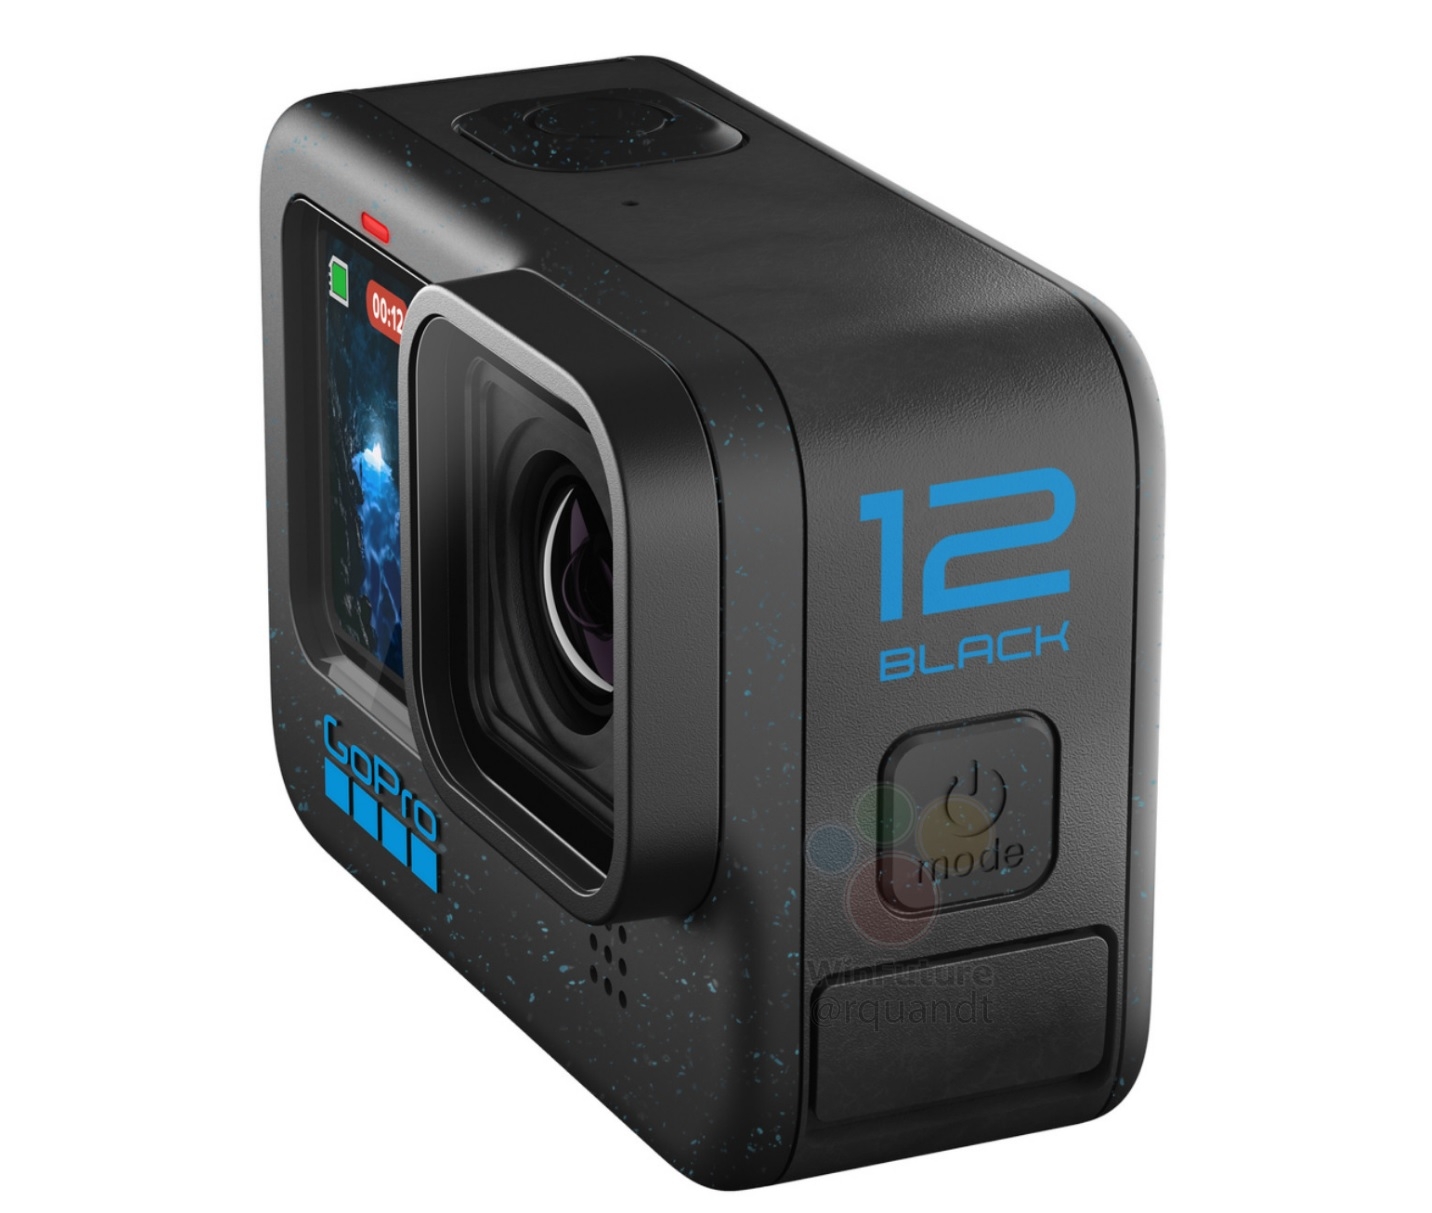 GoPro HERO12 Black Action Camera Specifications Reveal A 27MP Camera With  5.3K 60FPS 10-Bit Video Support, Increased Runtime, More